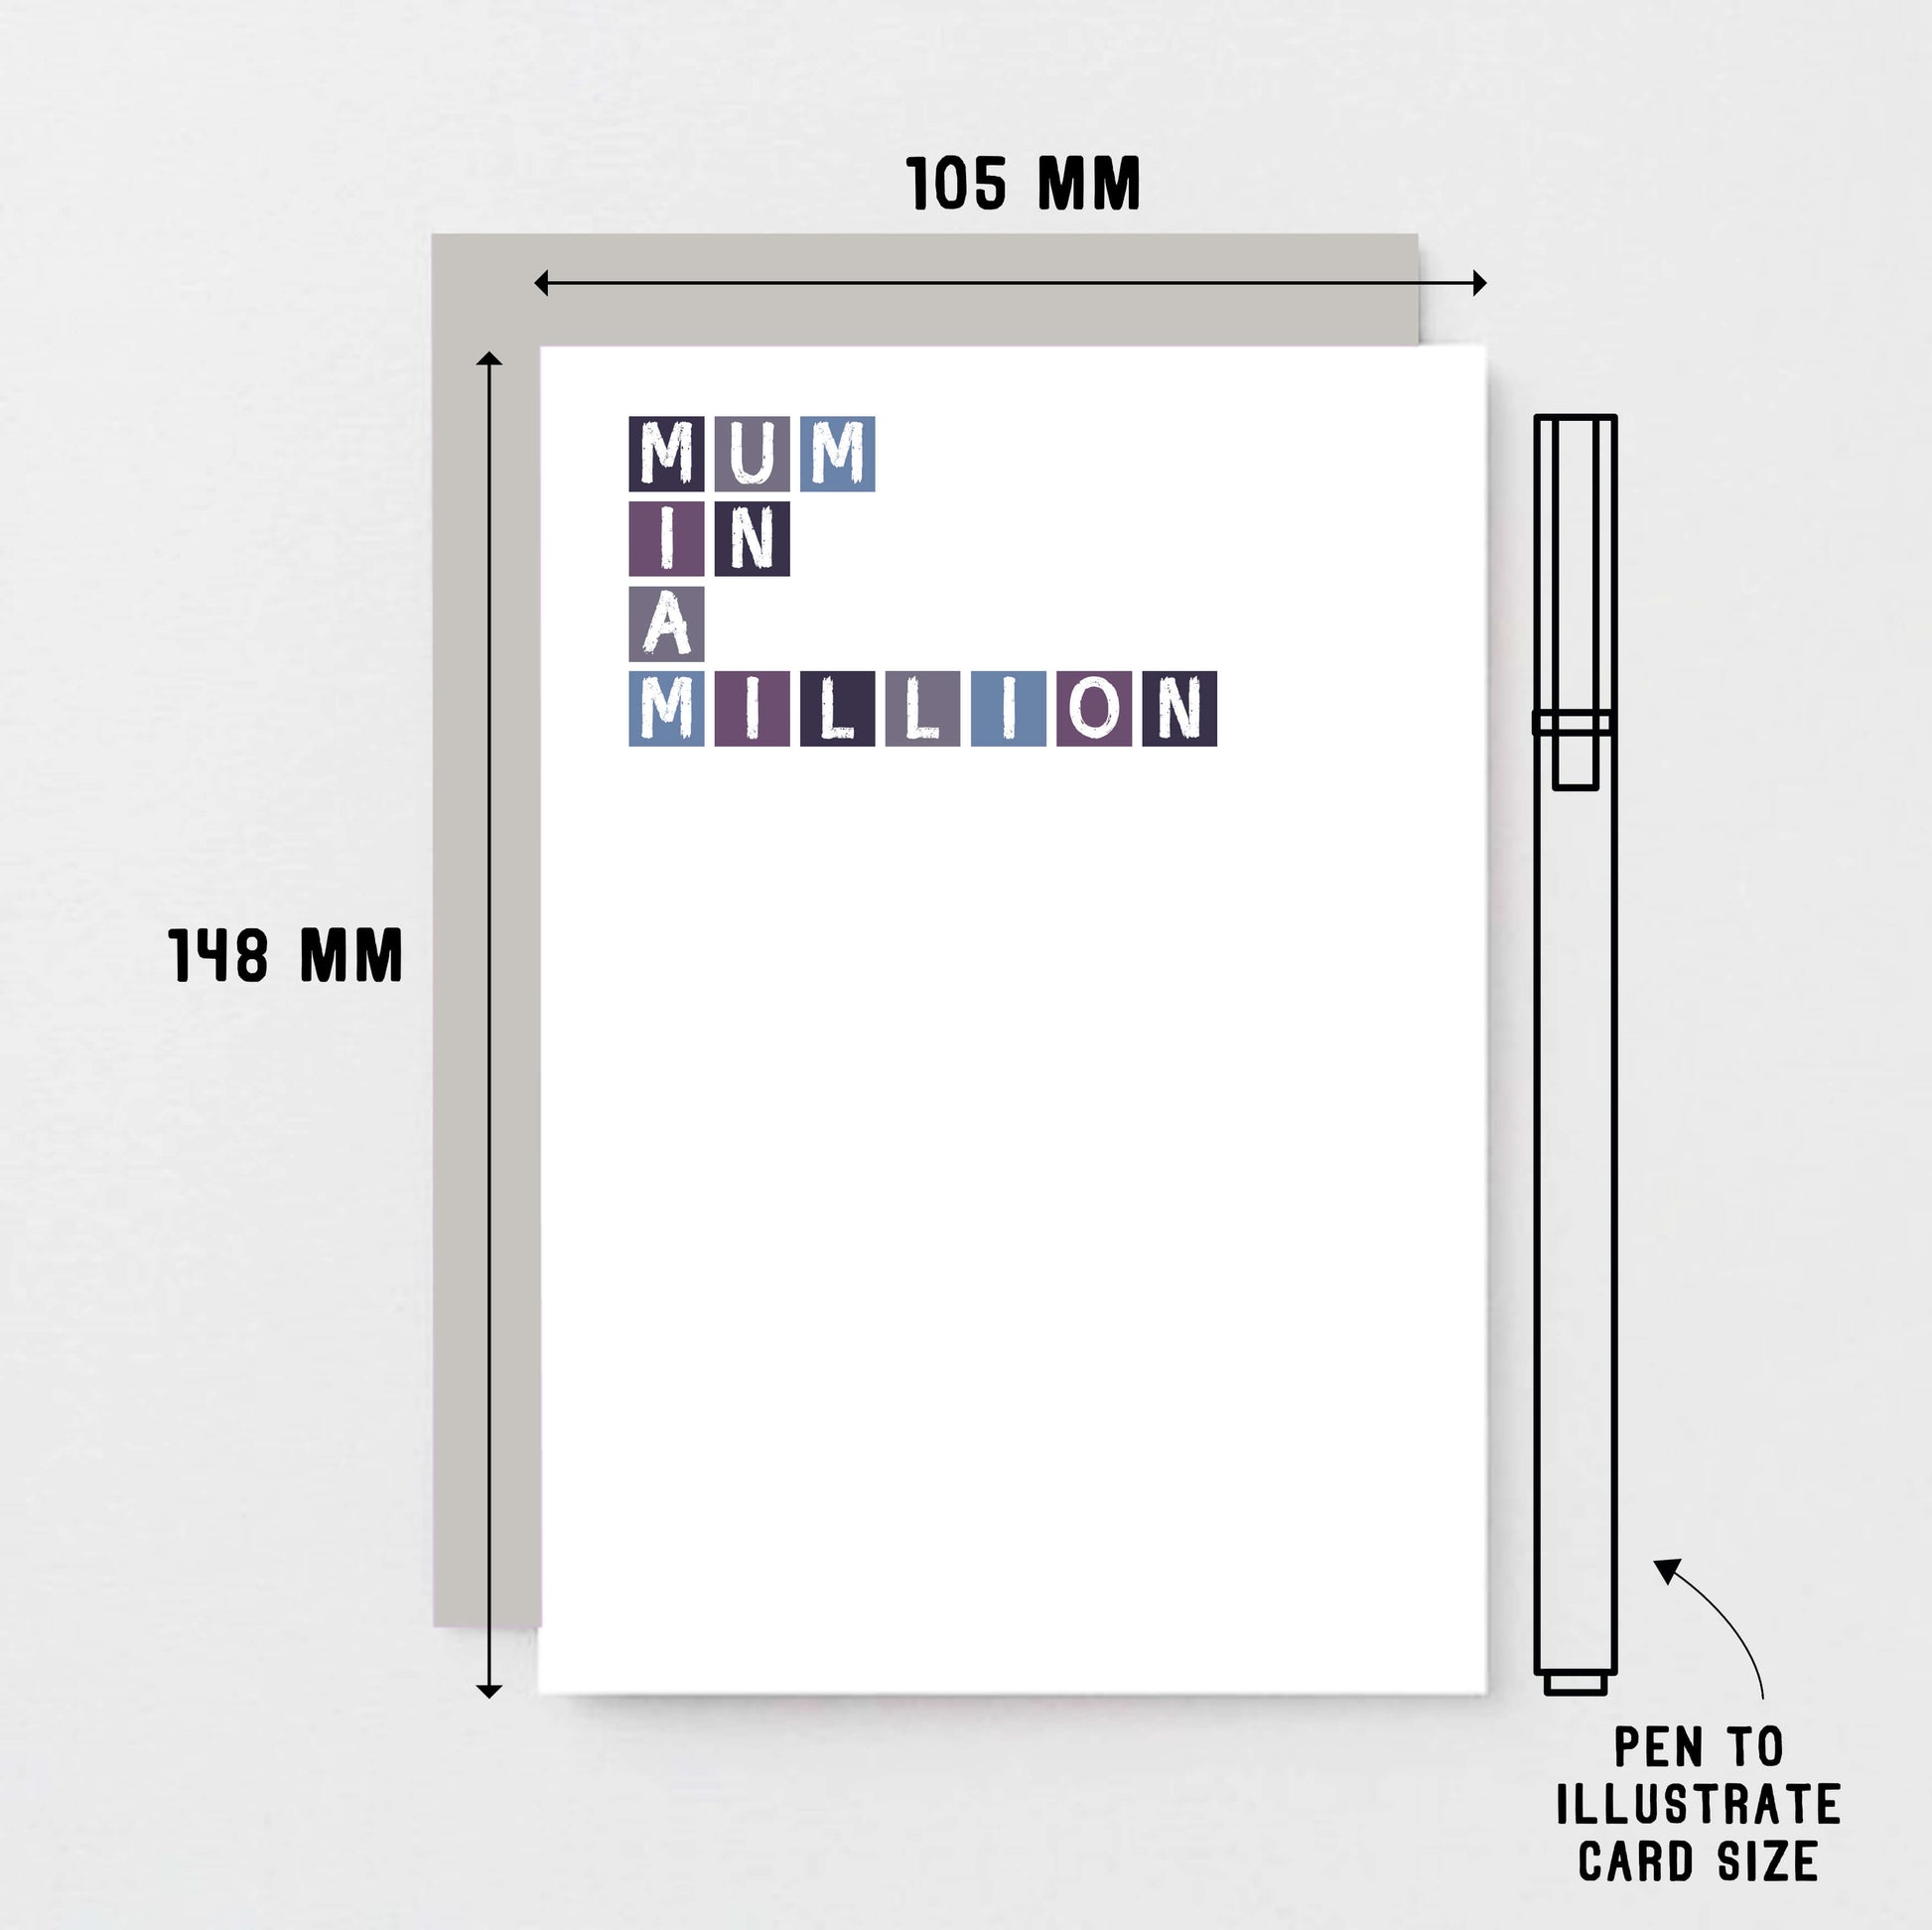 Mum In A Million Card by SixElevenCreations. Product Code SE0308A6